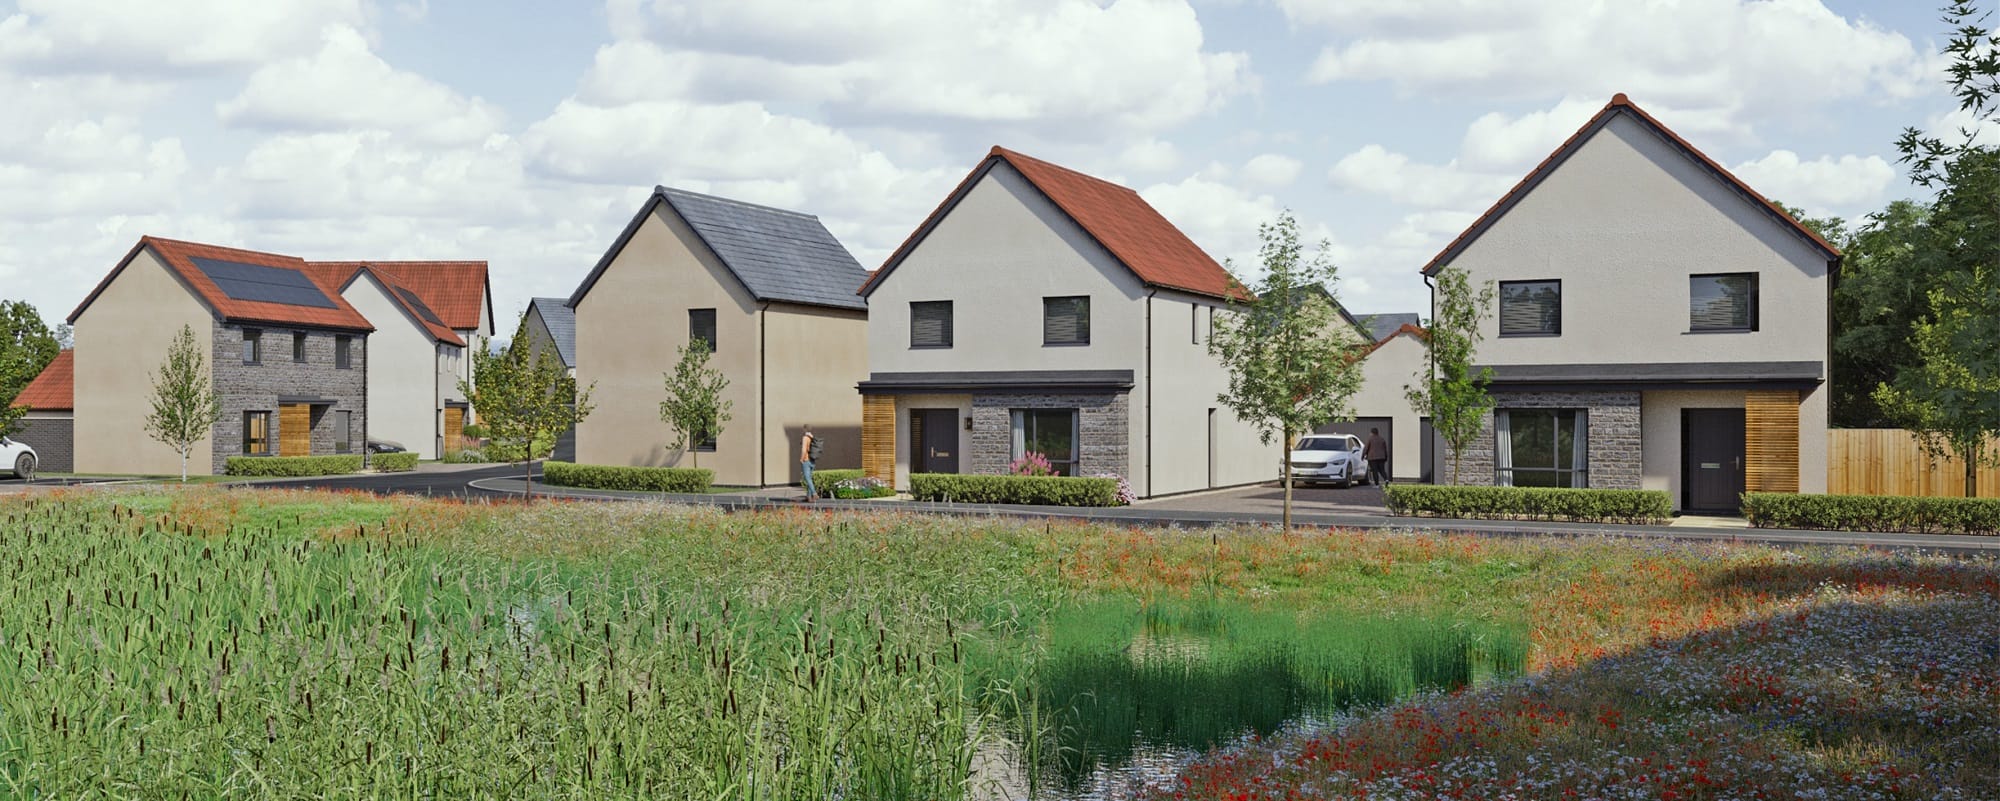 New homes in Claverham